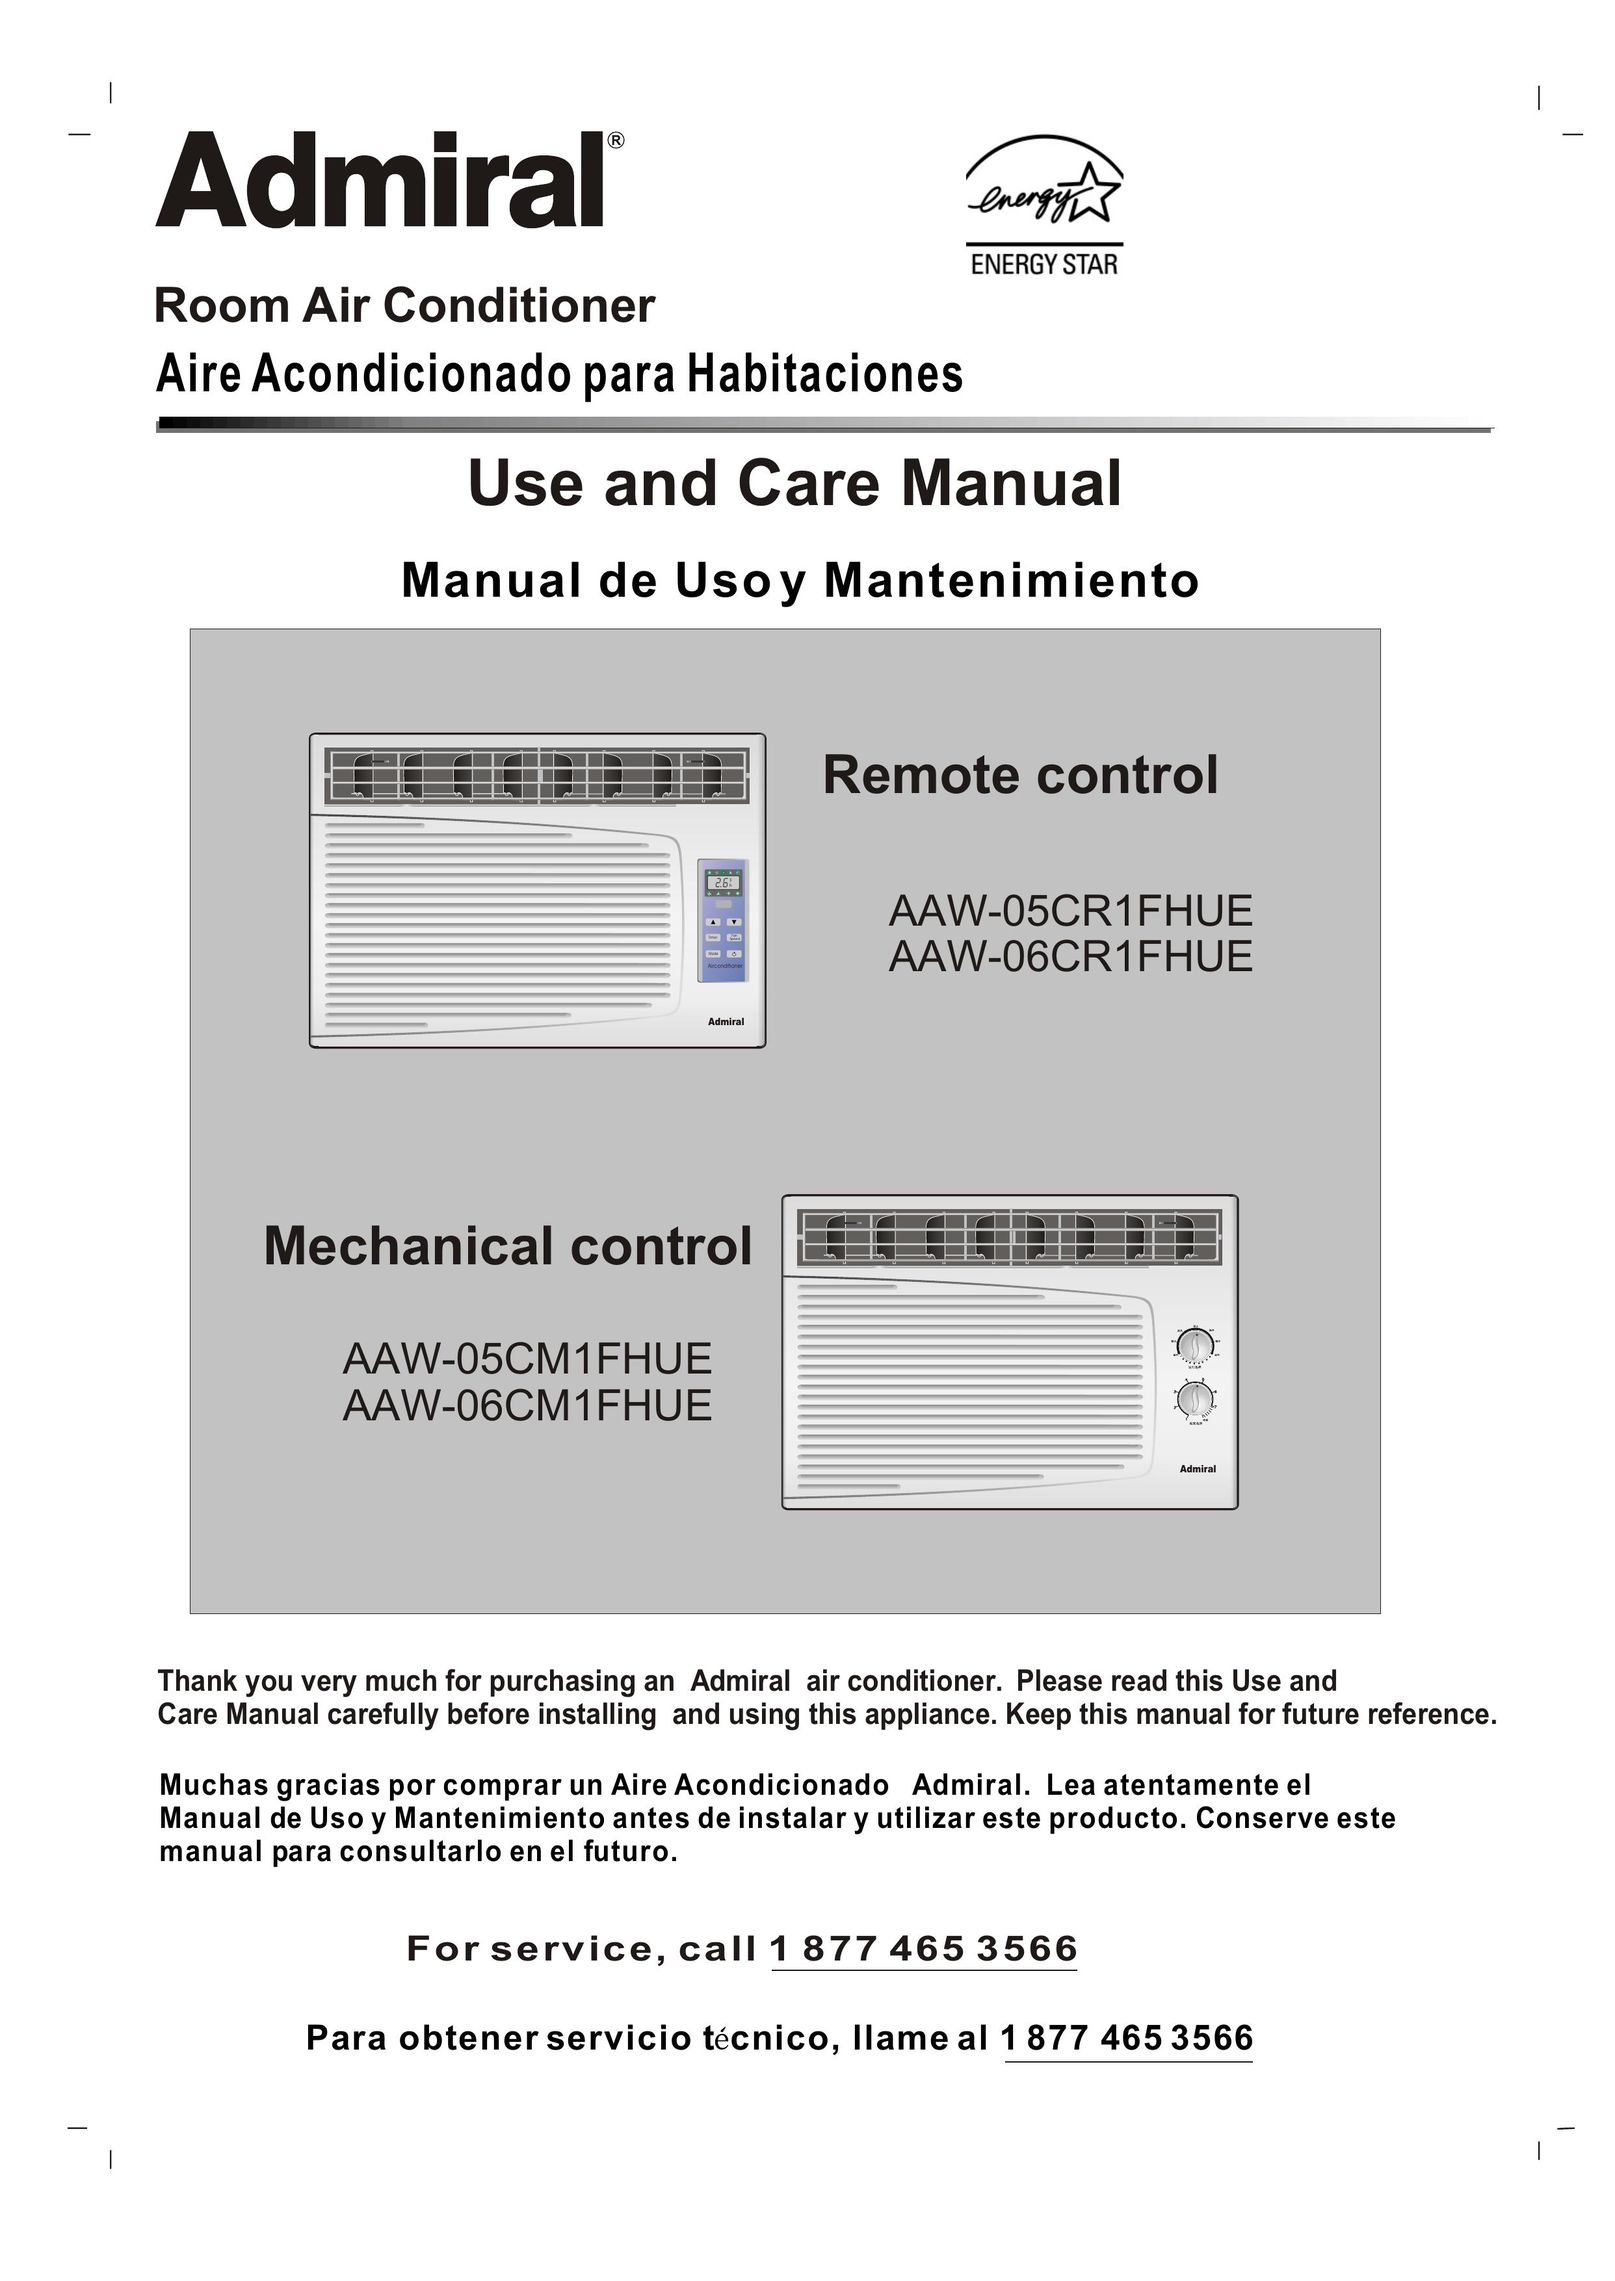 Admiral AAW-06CR1FHUE Air Conditioner User Manual